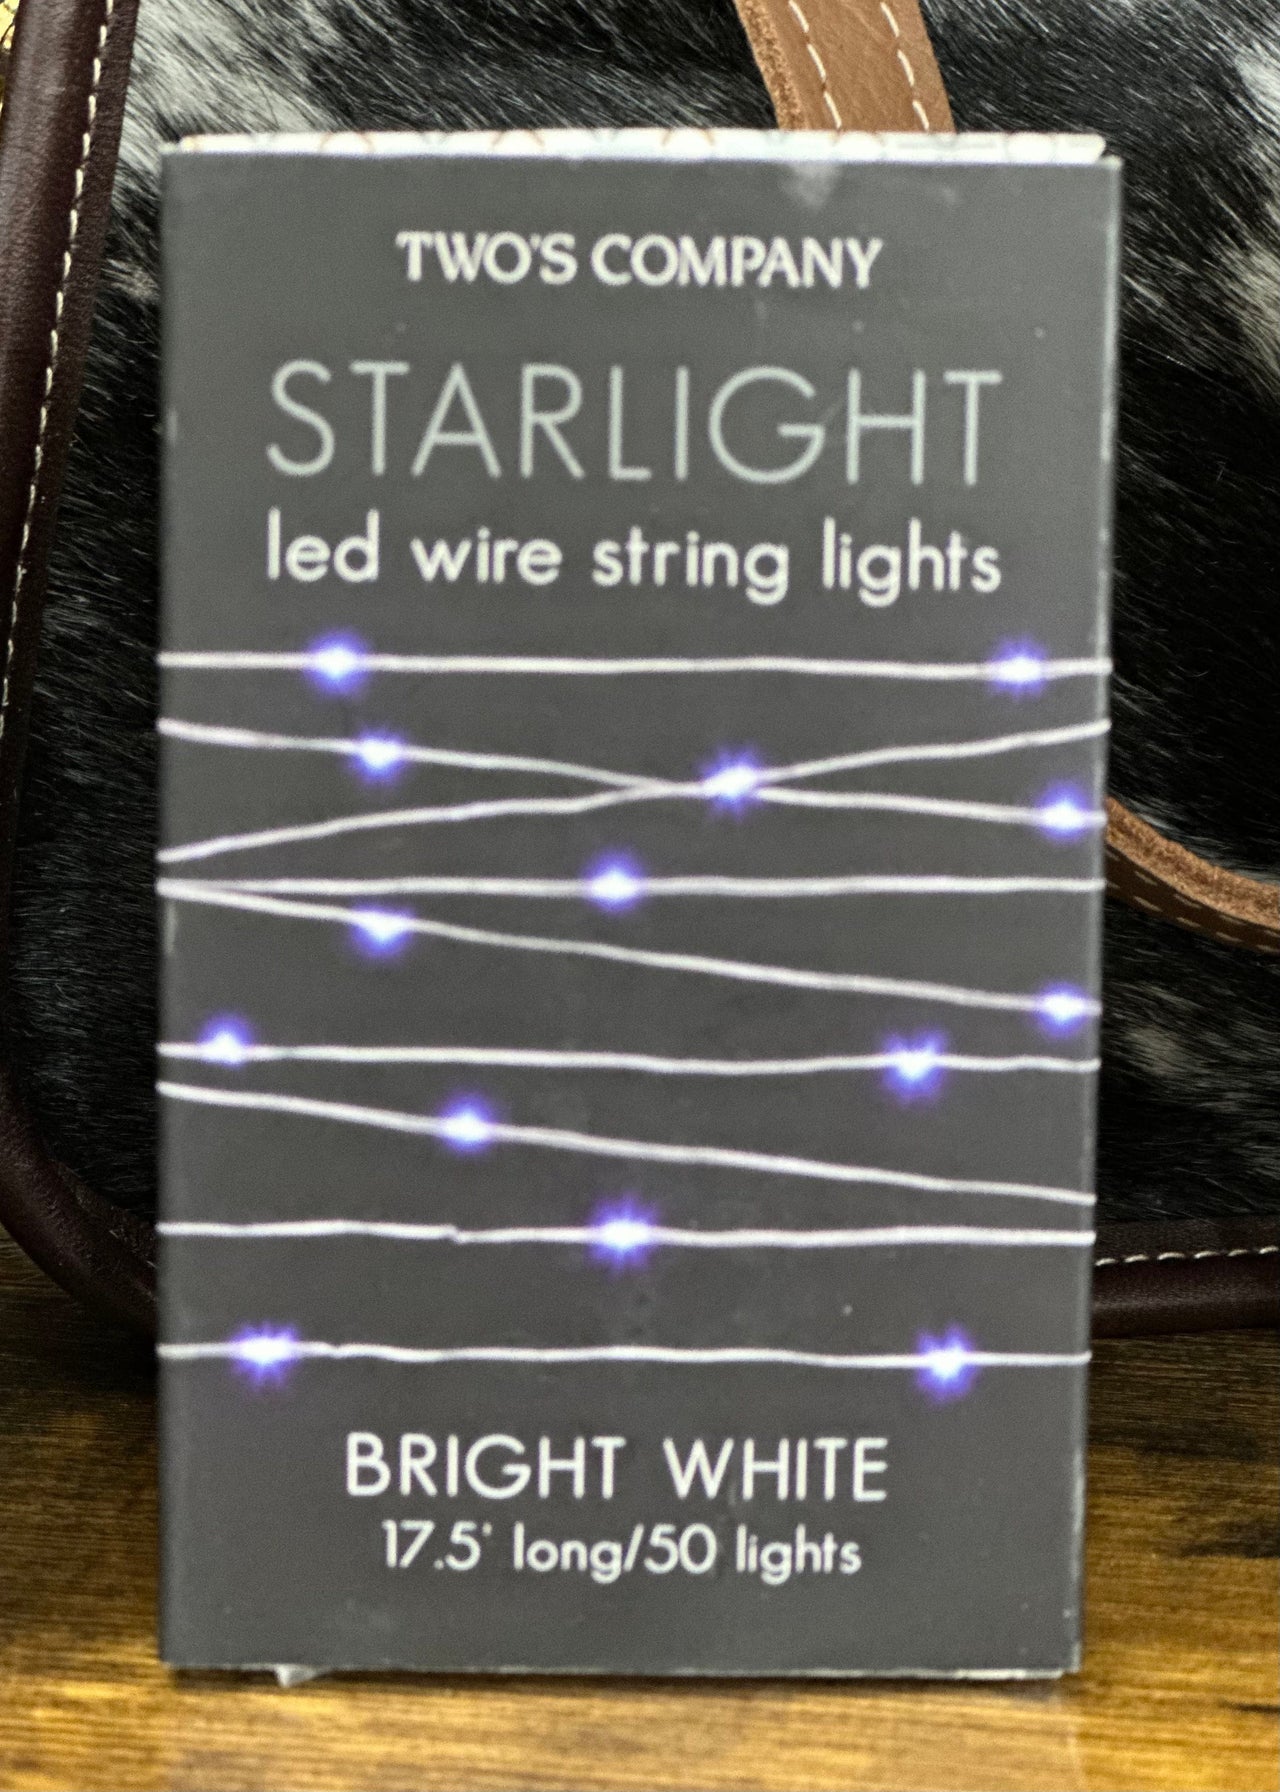 Starlight Wire LED Lights Two’s Company Bright White